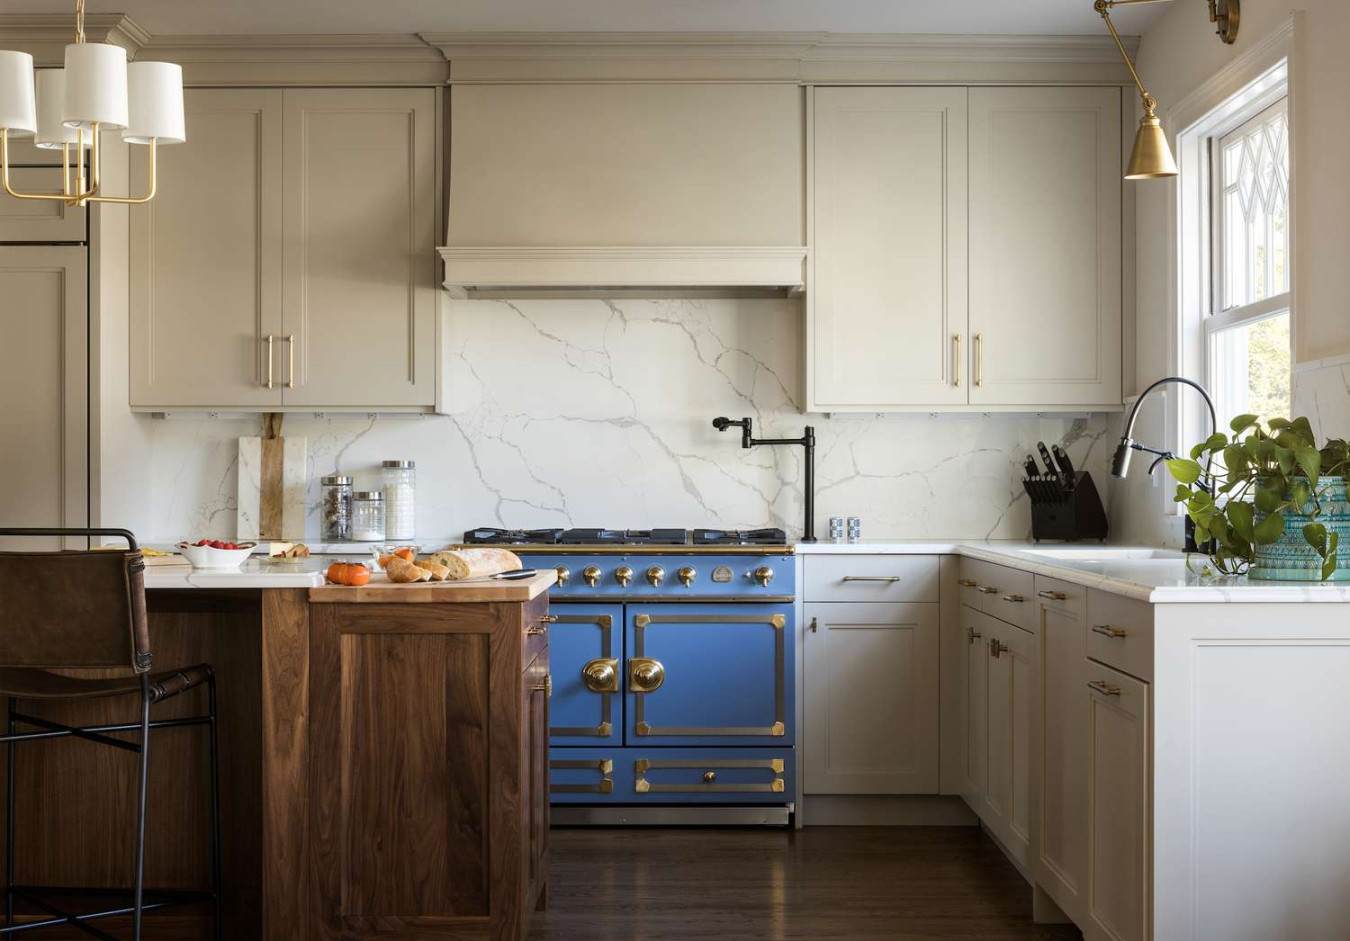 Kitchen Cabinet Styles to Consider for Your Next Remodel